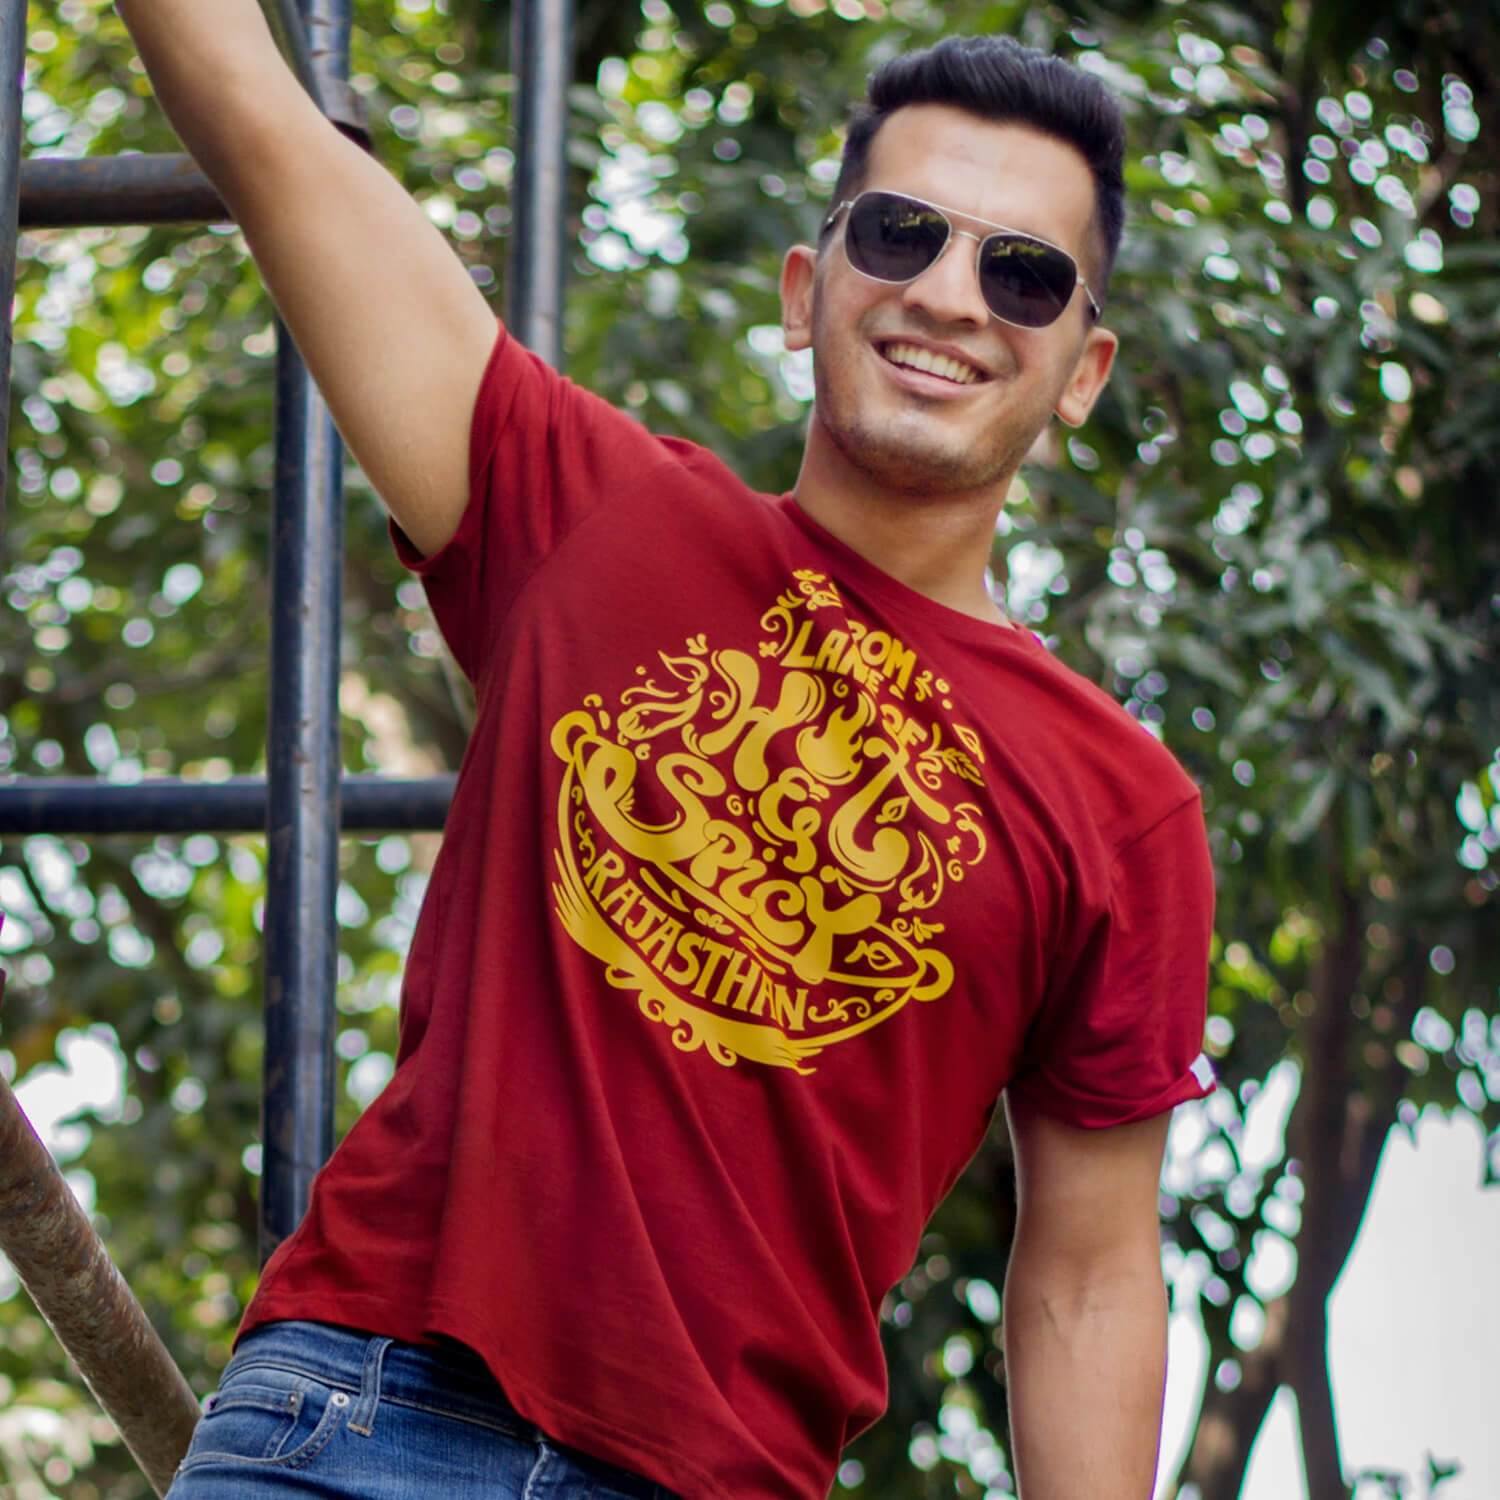 Land of Hot & Spicy Rajasthan - Red T-Shirt - Raahi